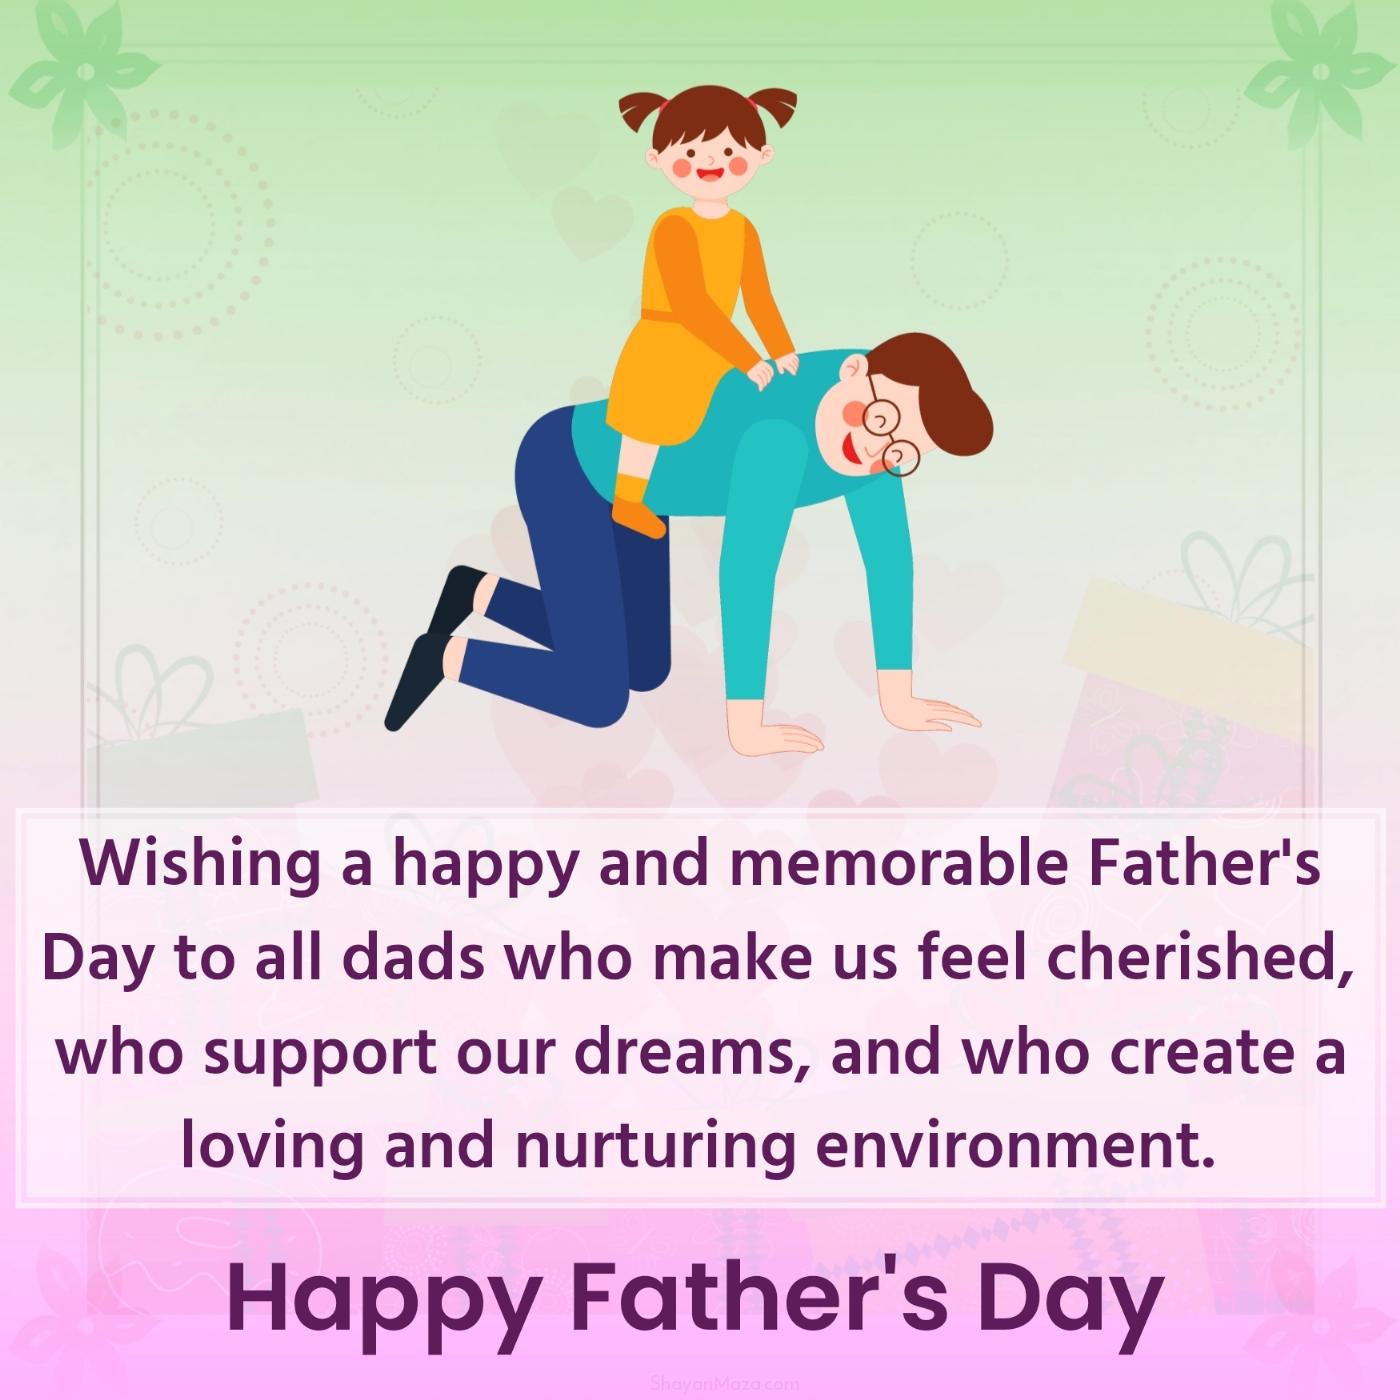 Wishing a happy and memorable Father's Day to all dads